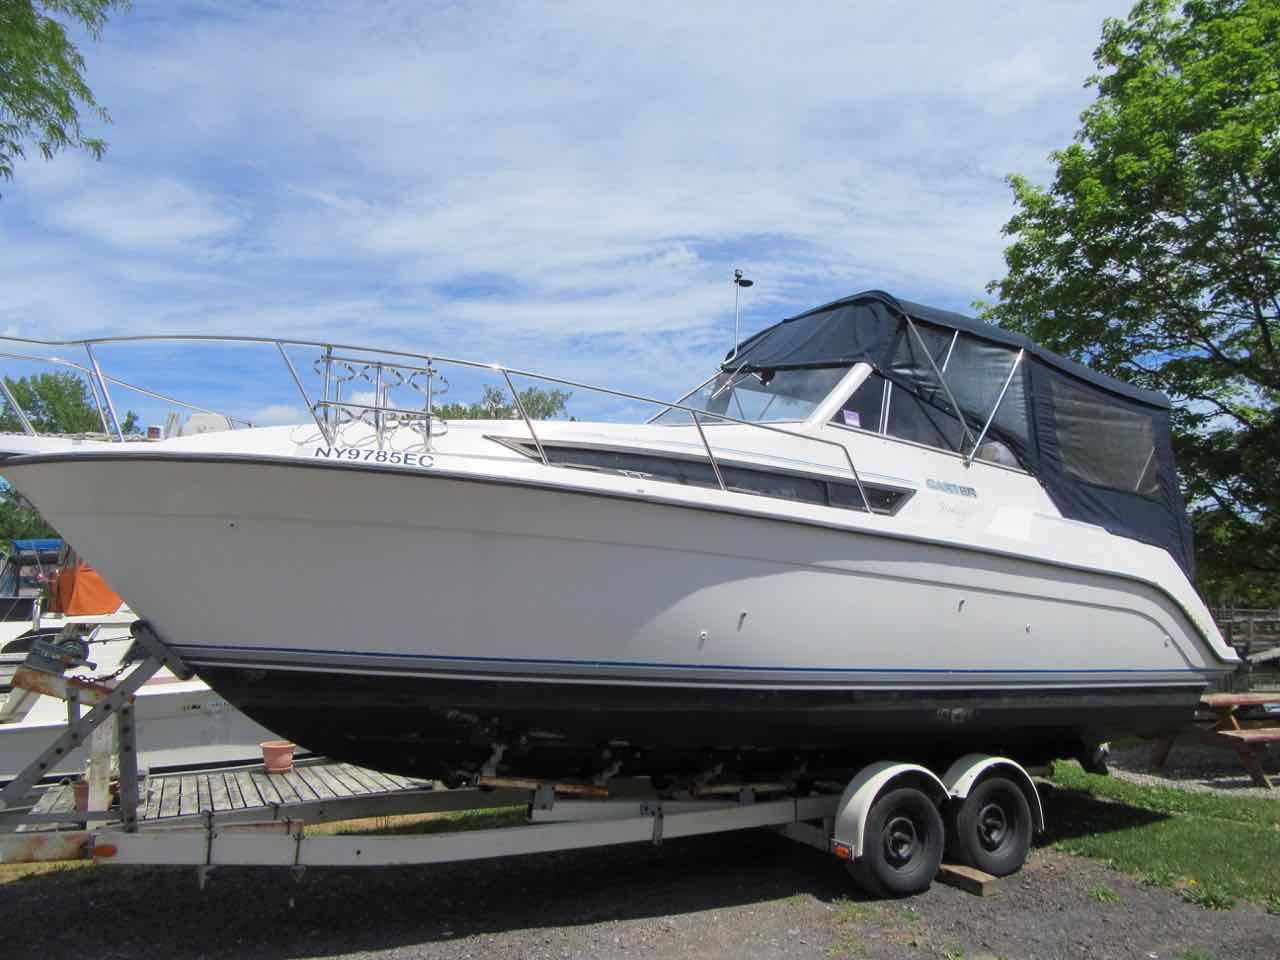 28' - 1992 Carver Montego 528 $21,000 Recent Canvas two owners, low hours.